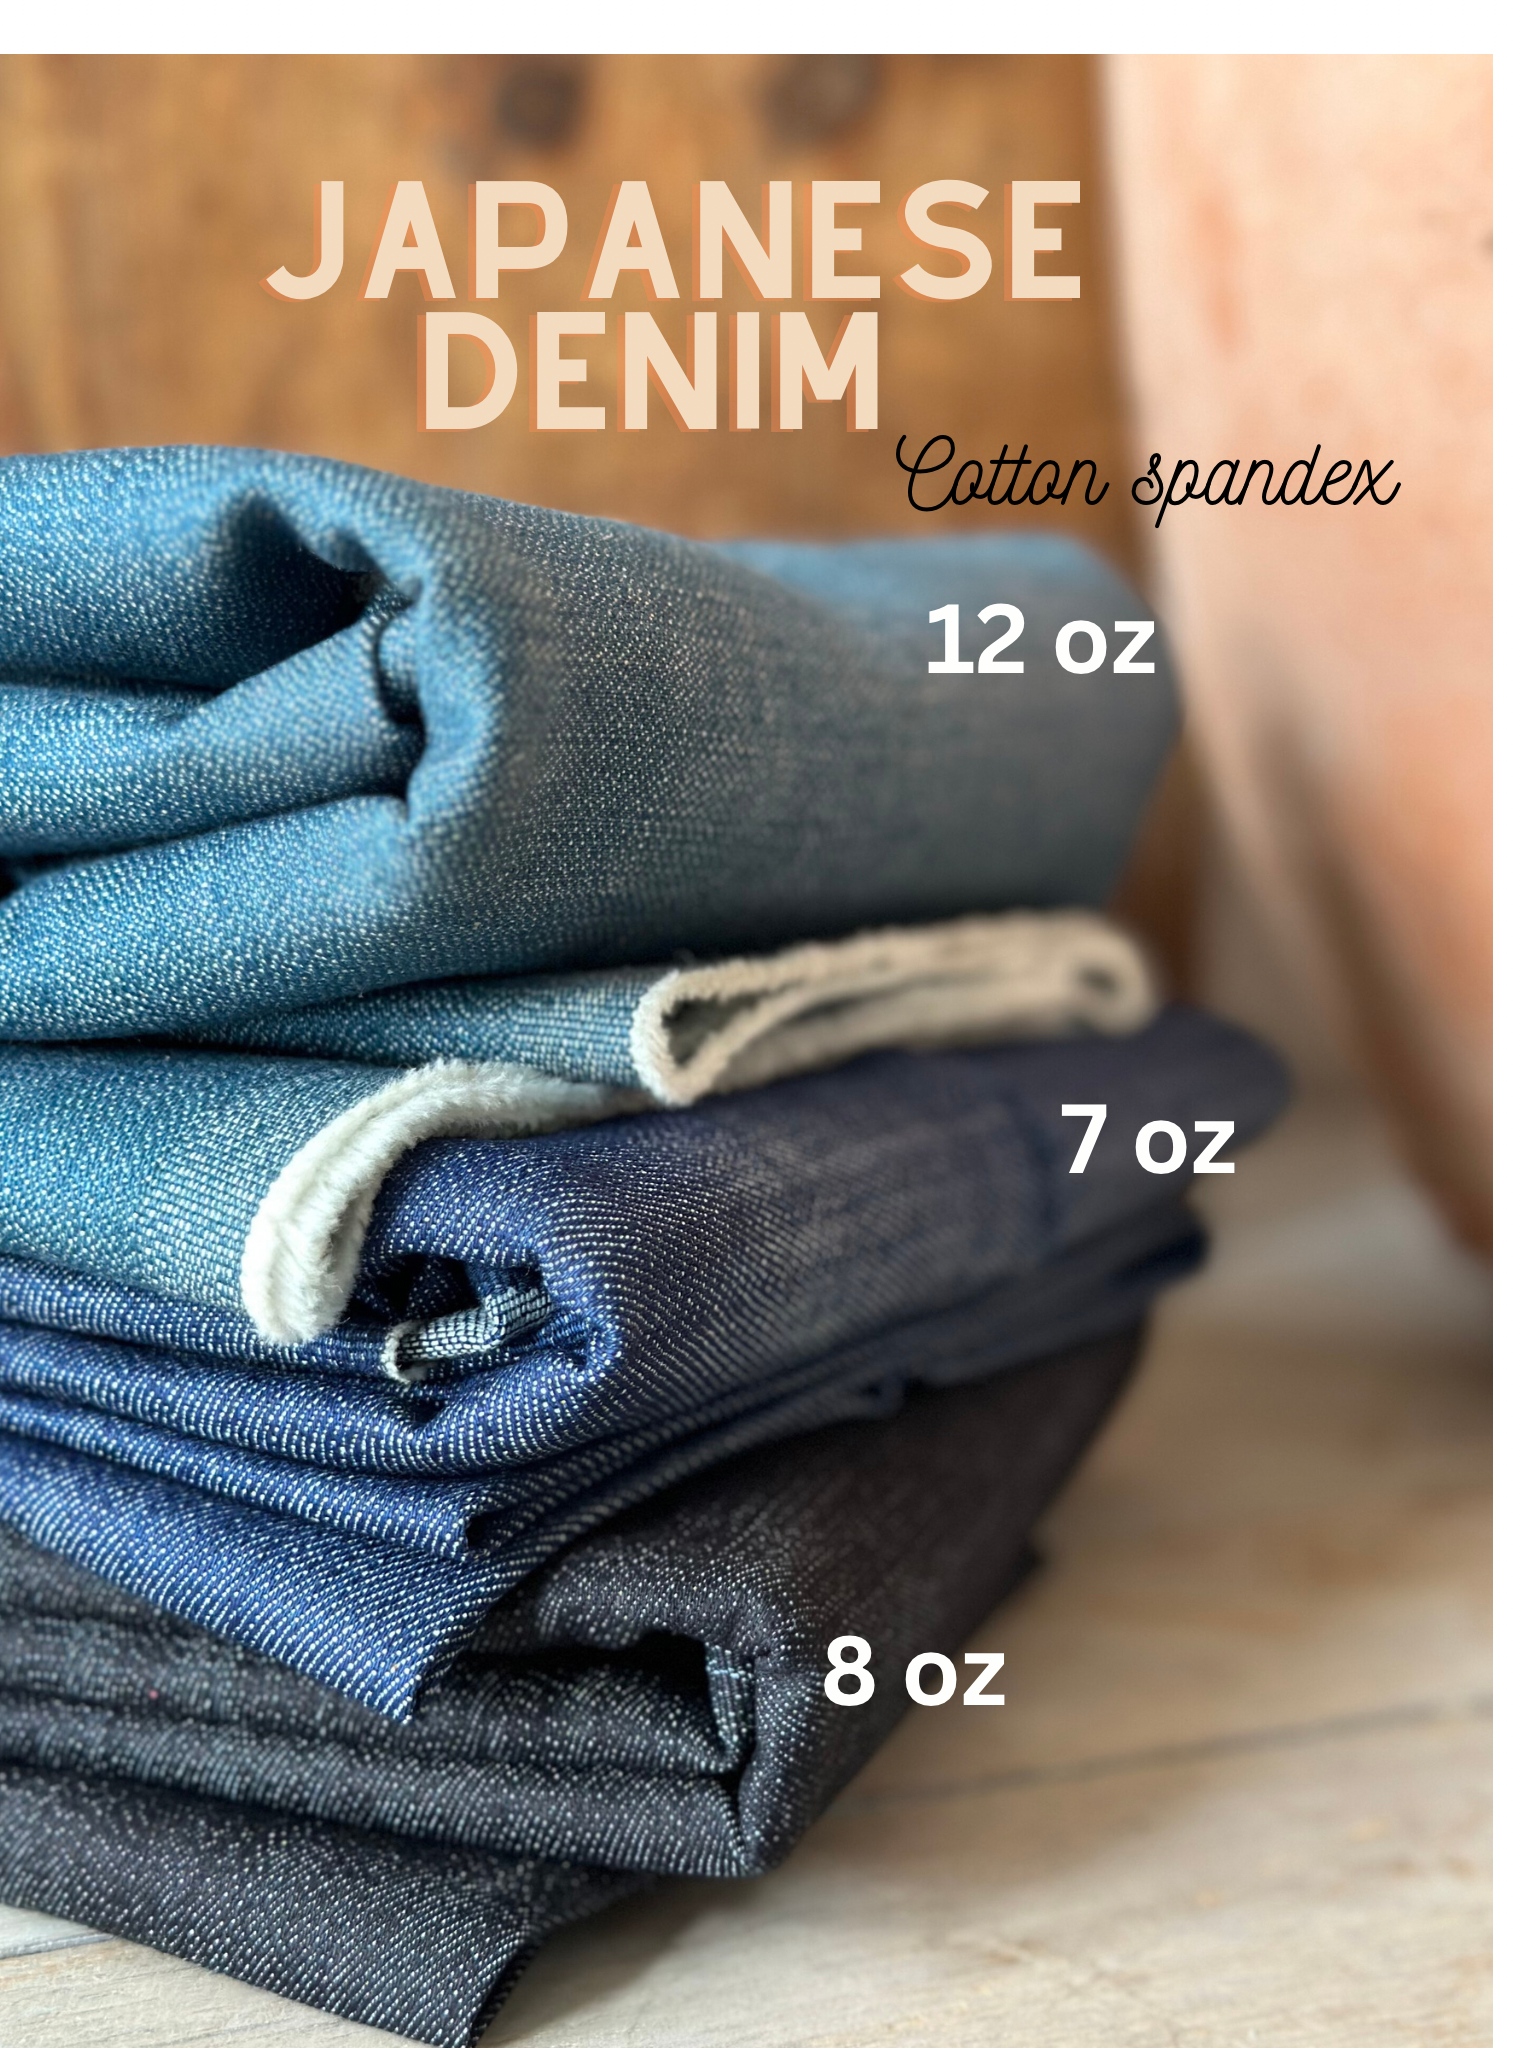 Jeans Selection - mattress fabrics made from recycled, eco-friendly denim  yarn, Jeans Selection